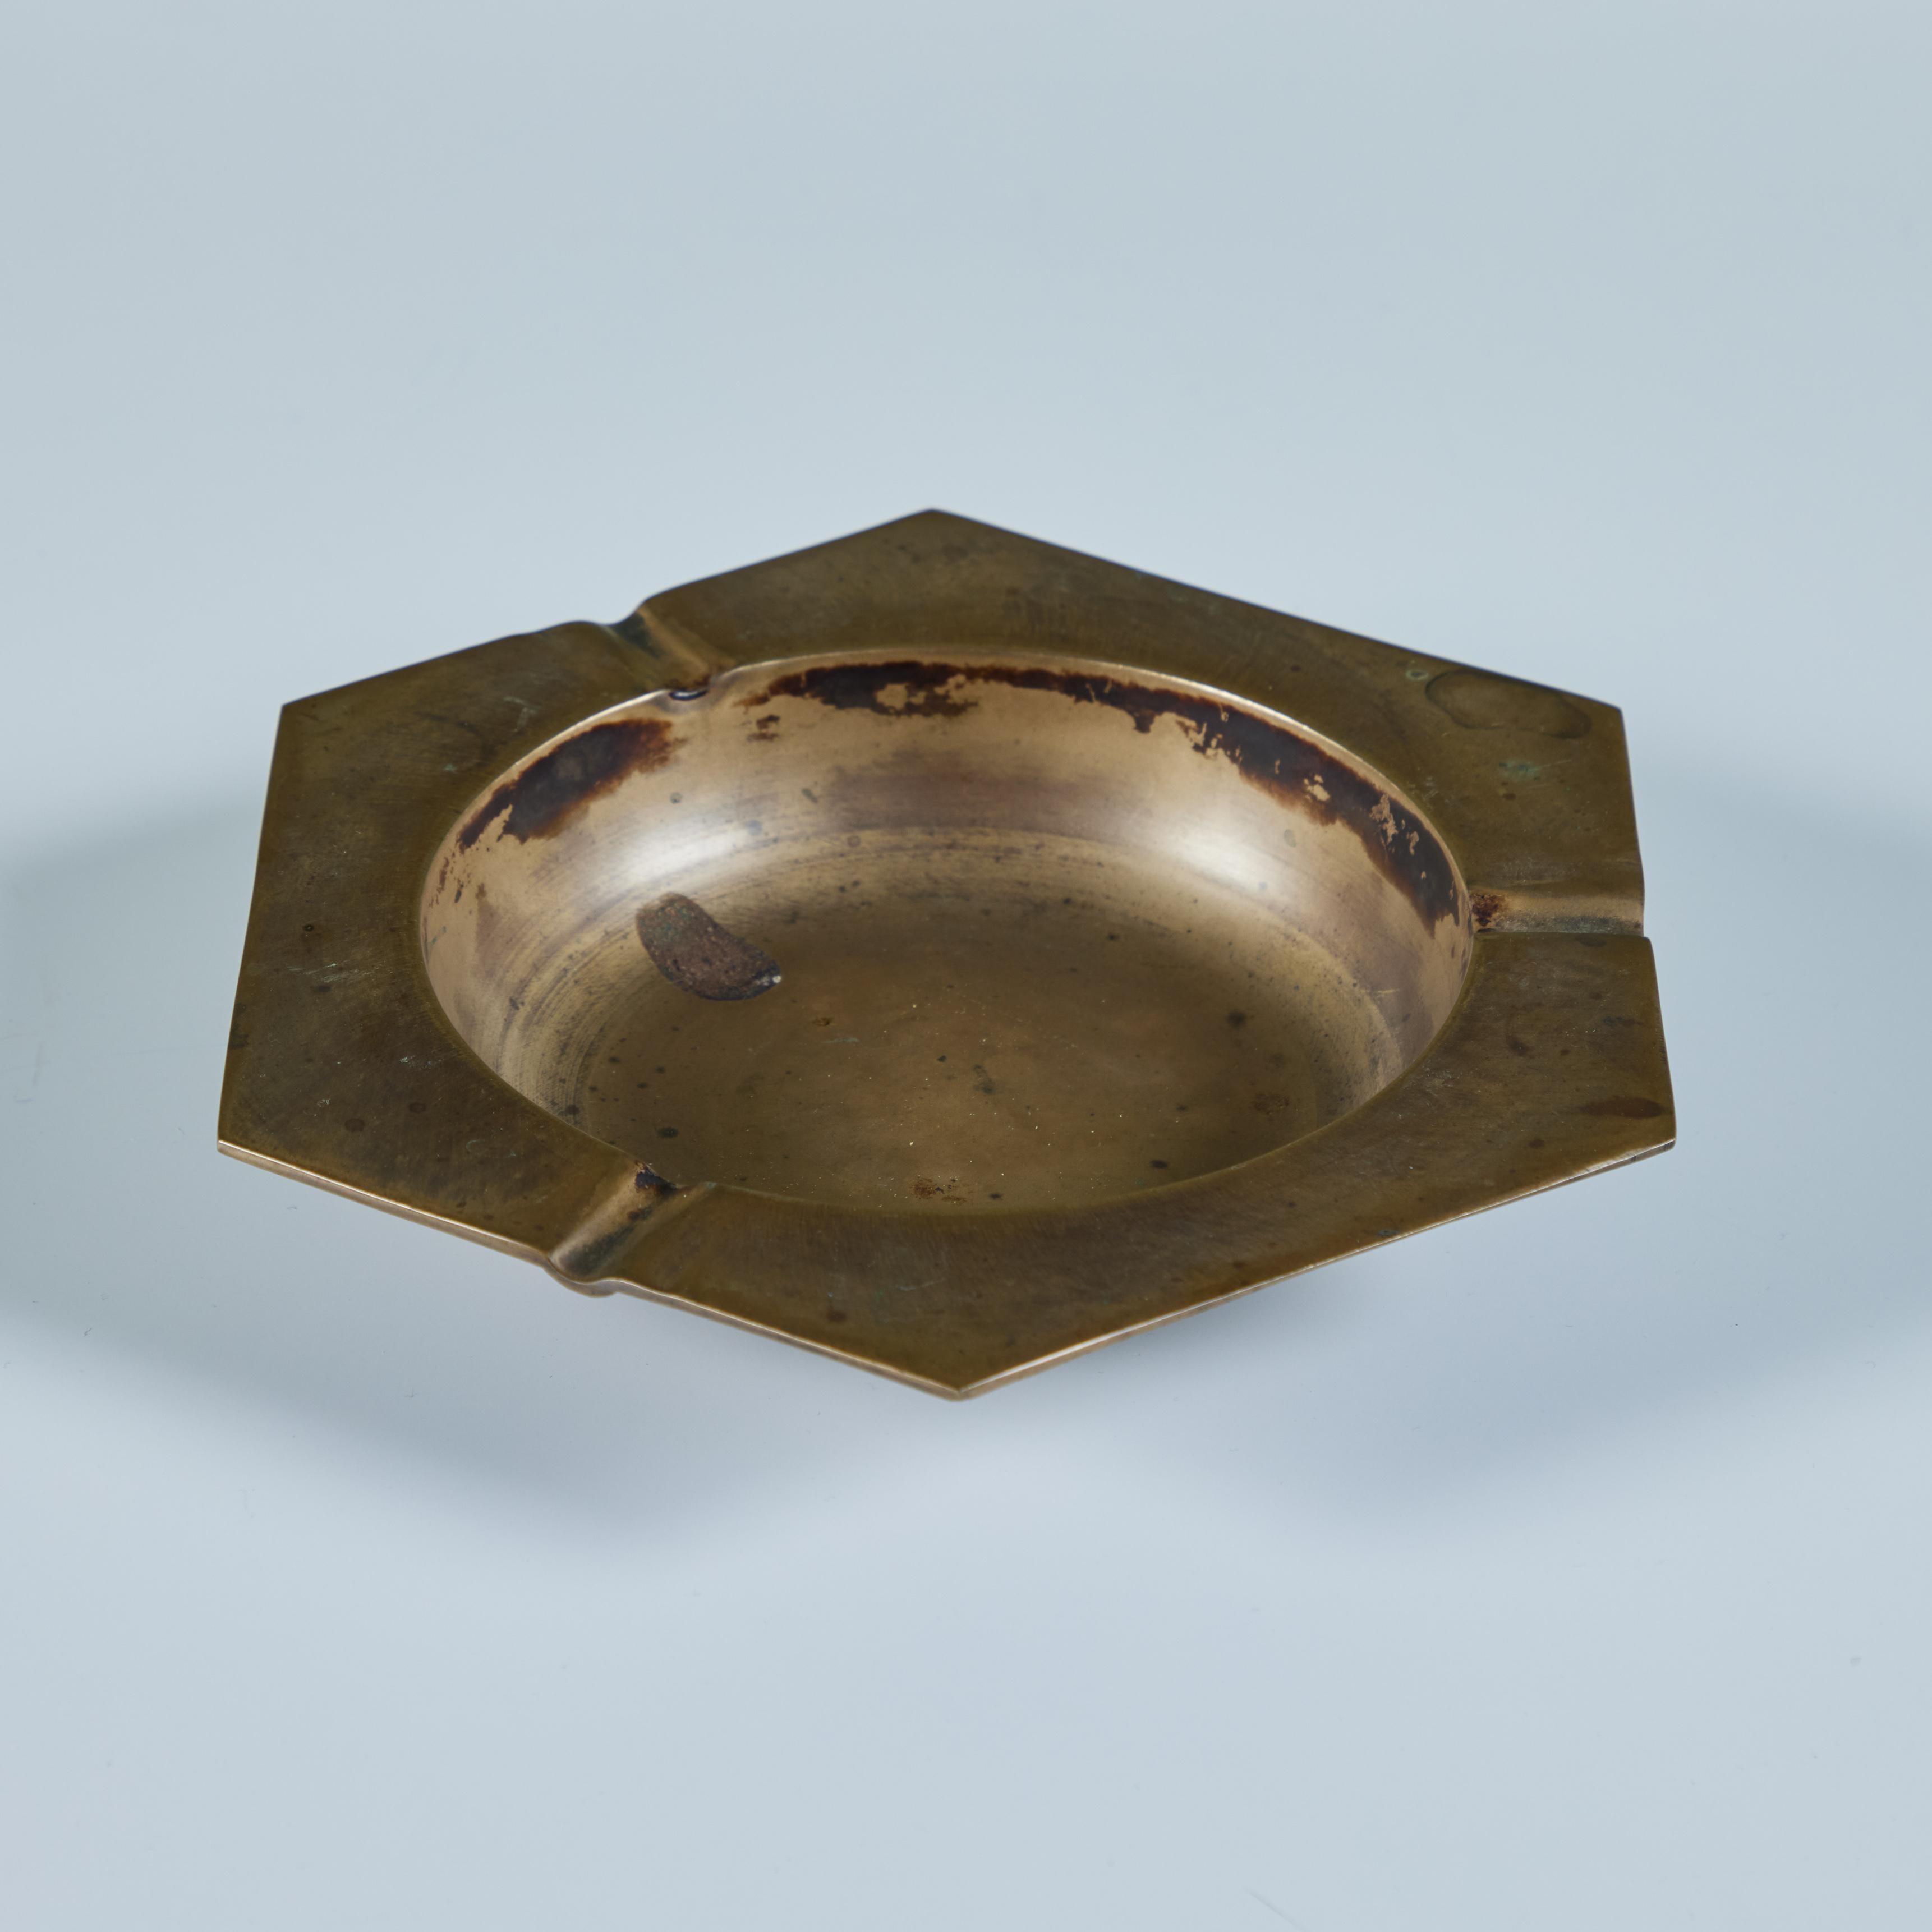 Brass hexagonal ashtray featuring a deep round well with three divots on alternating sides.

Dimensions
7.25